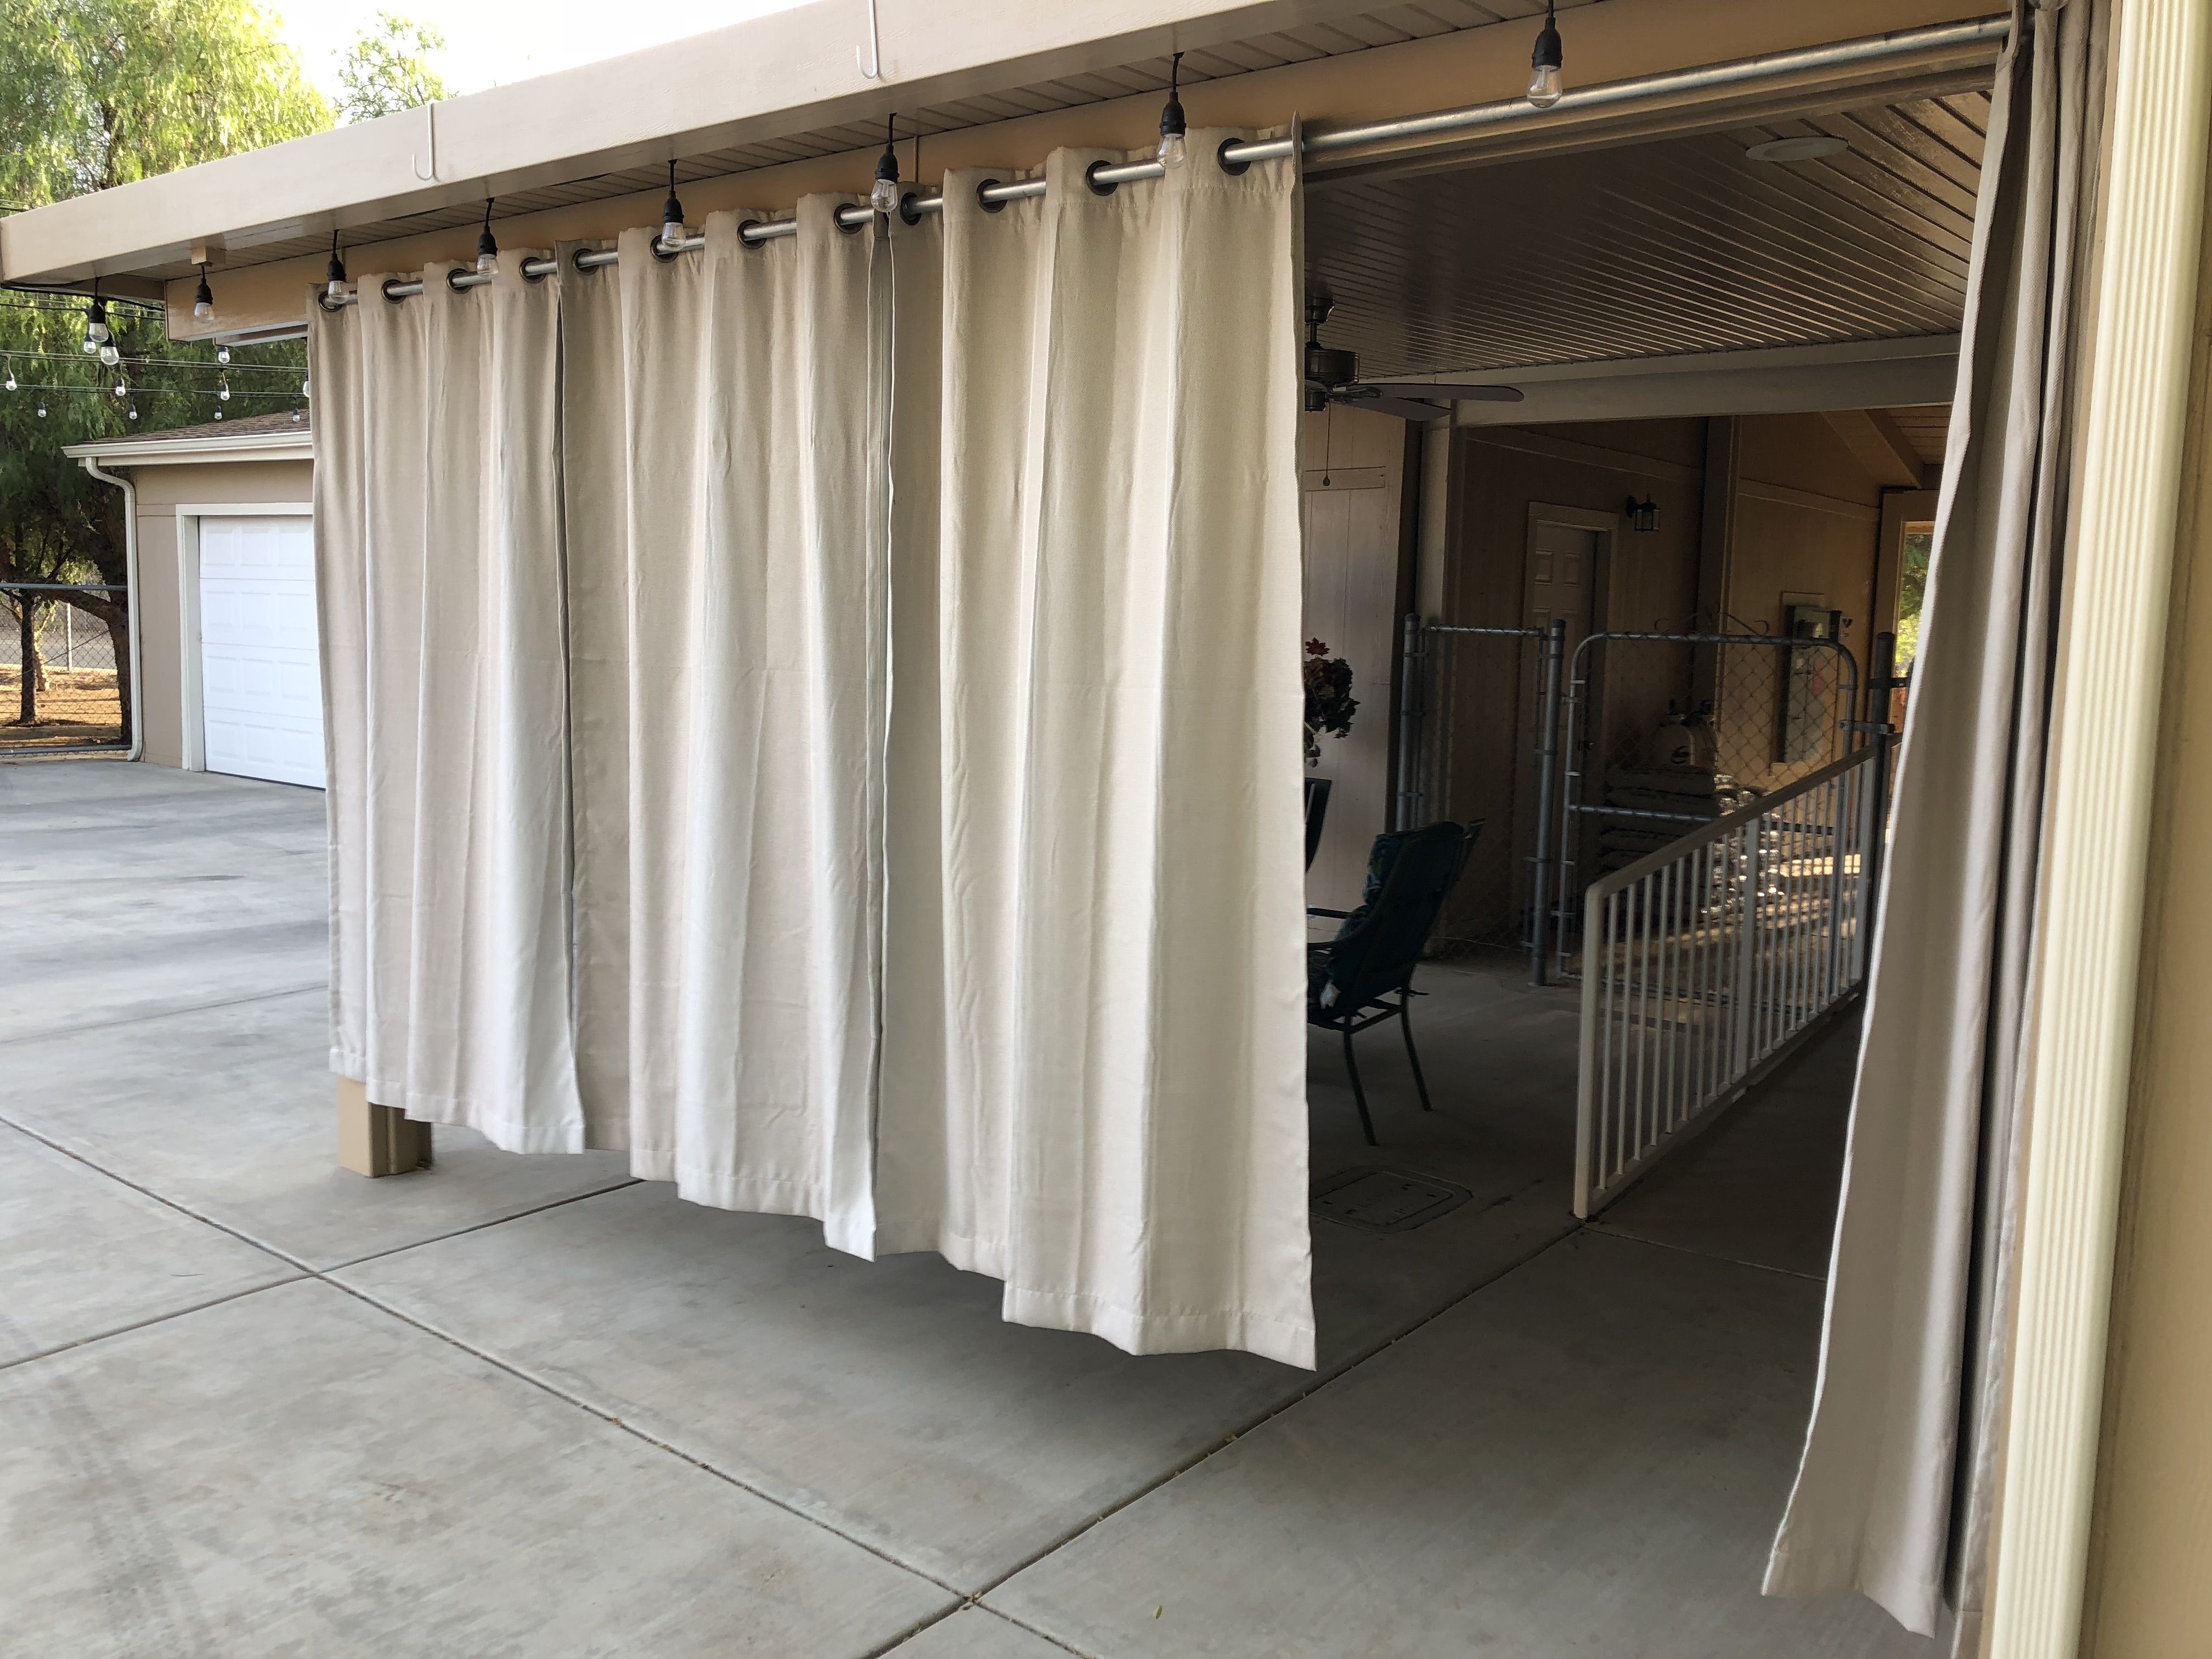 With Alumahangers You Can Hang Drapes From Your Aluminum in proportions 4032 X 3024